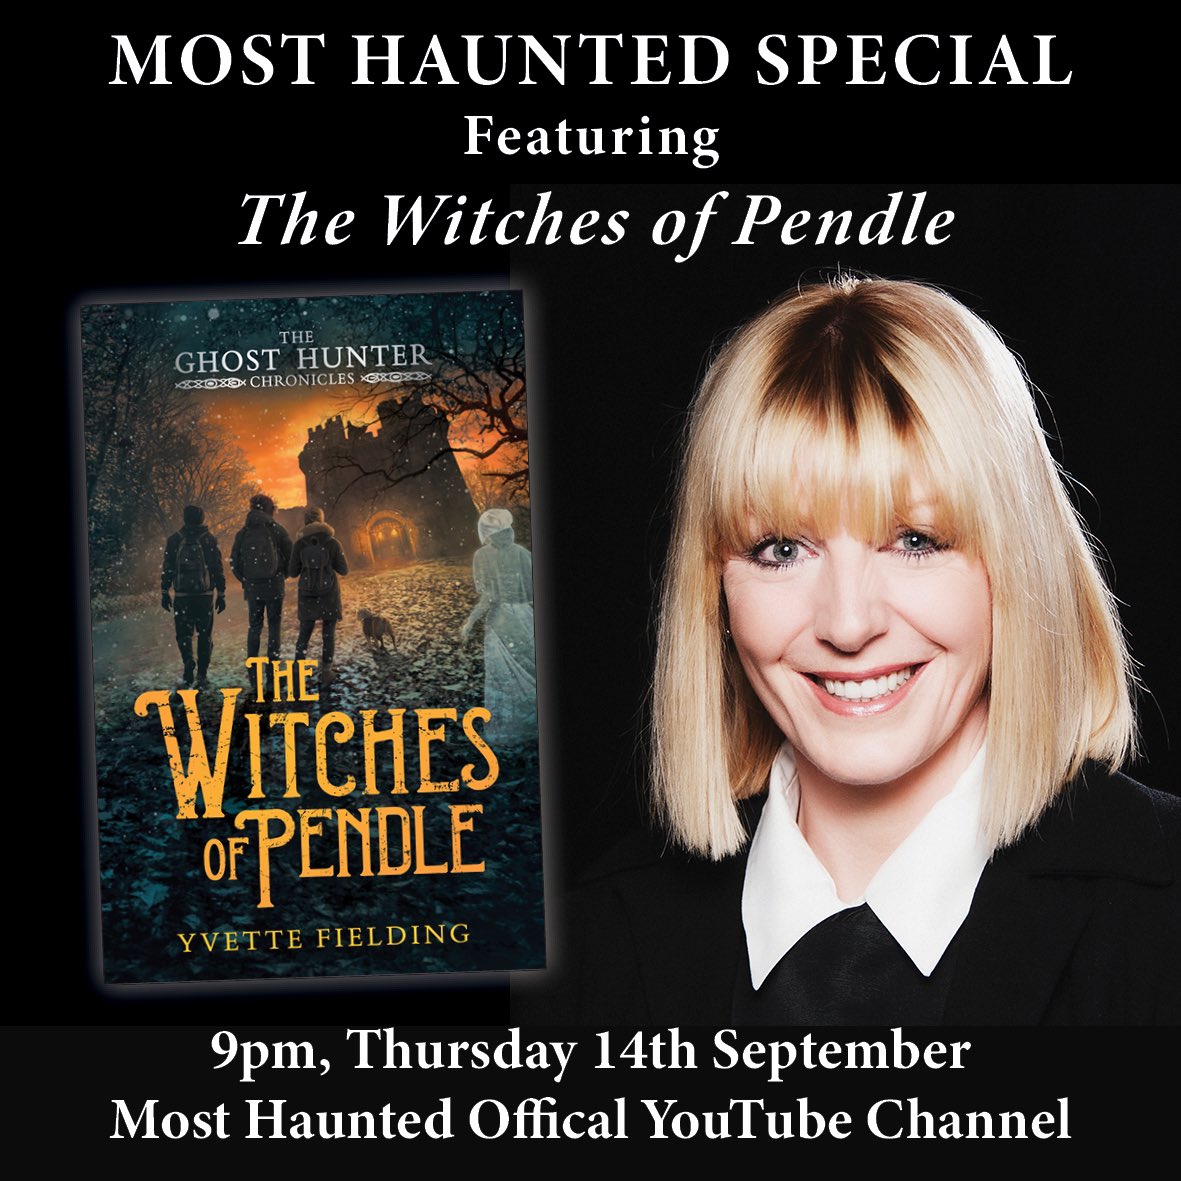 Brand new #Mosthaunted episode only available on youtube.com/mosthauntedoff…  This Thursday at 9pm #theghosthunterchronicles #Pendlehill #spooky #paranormal #ghosts #haunting #paranormal